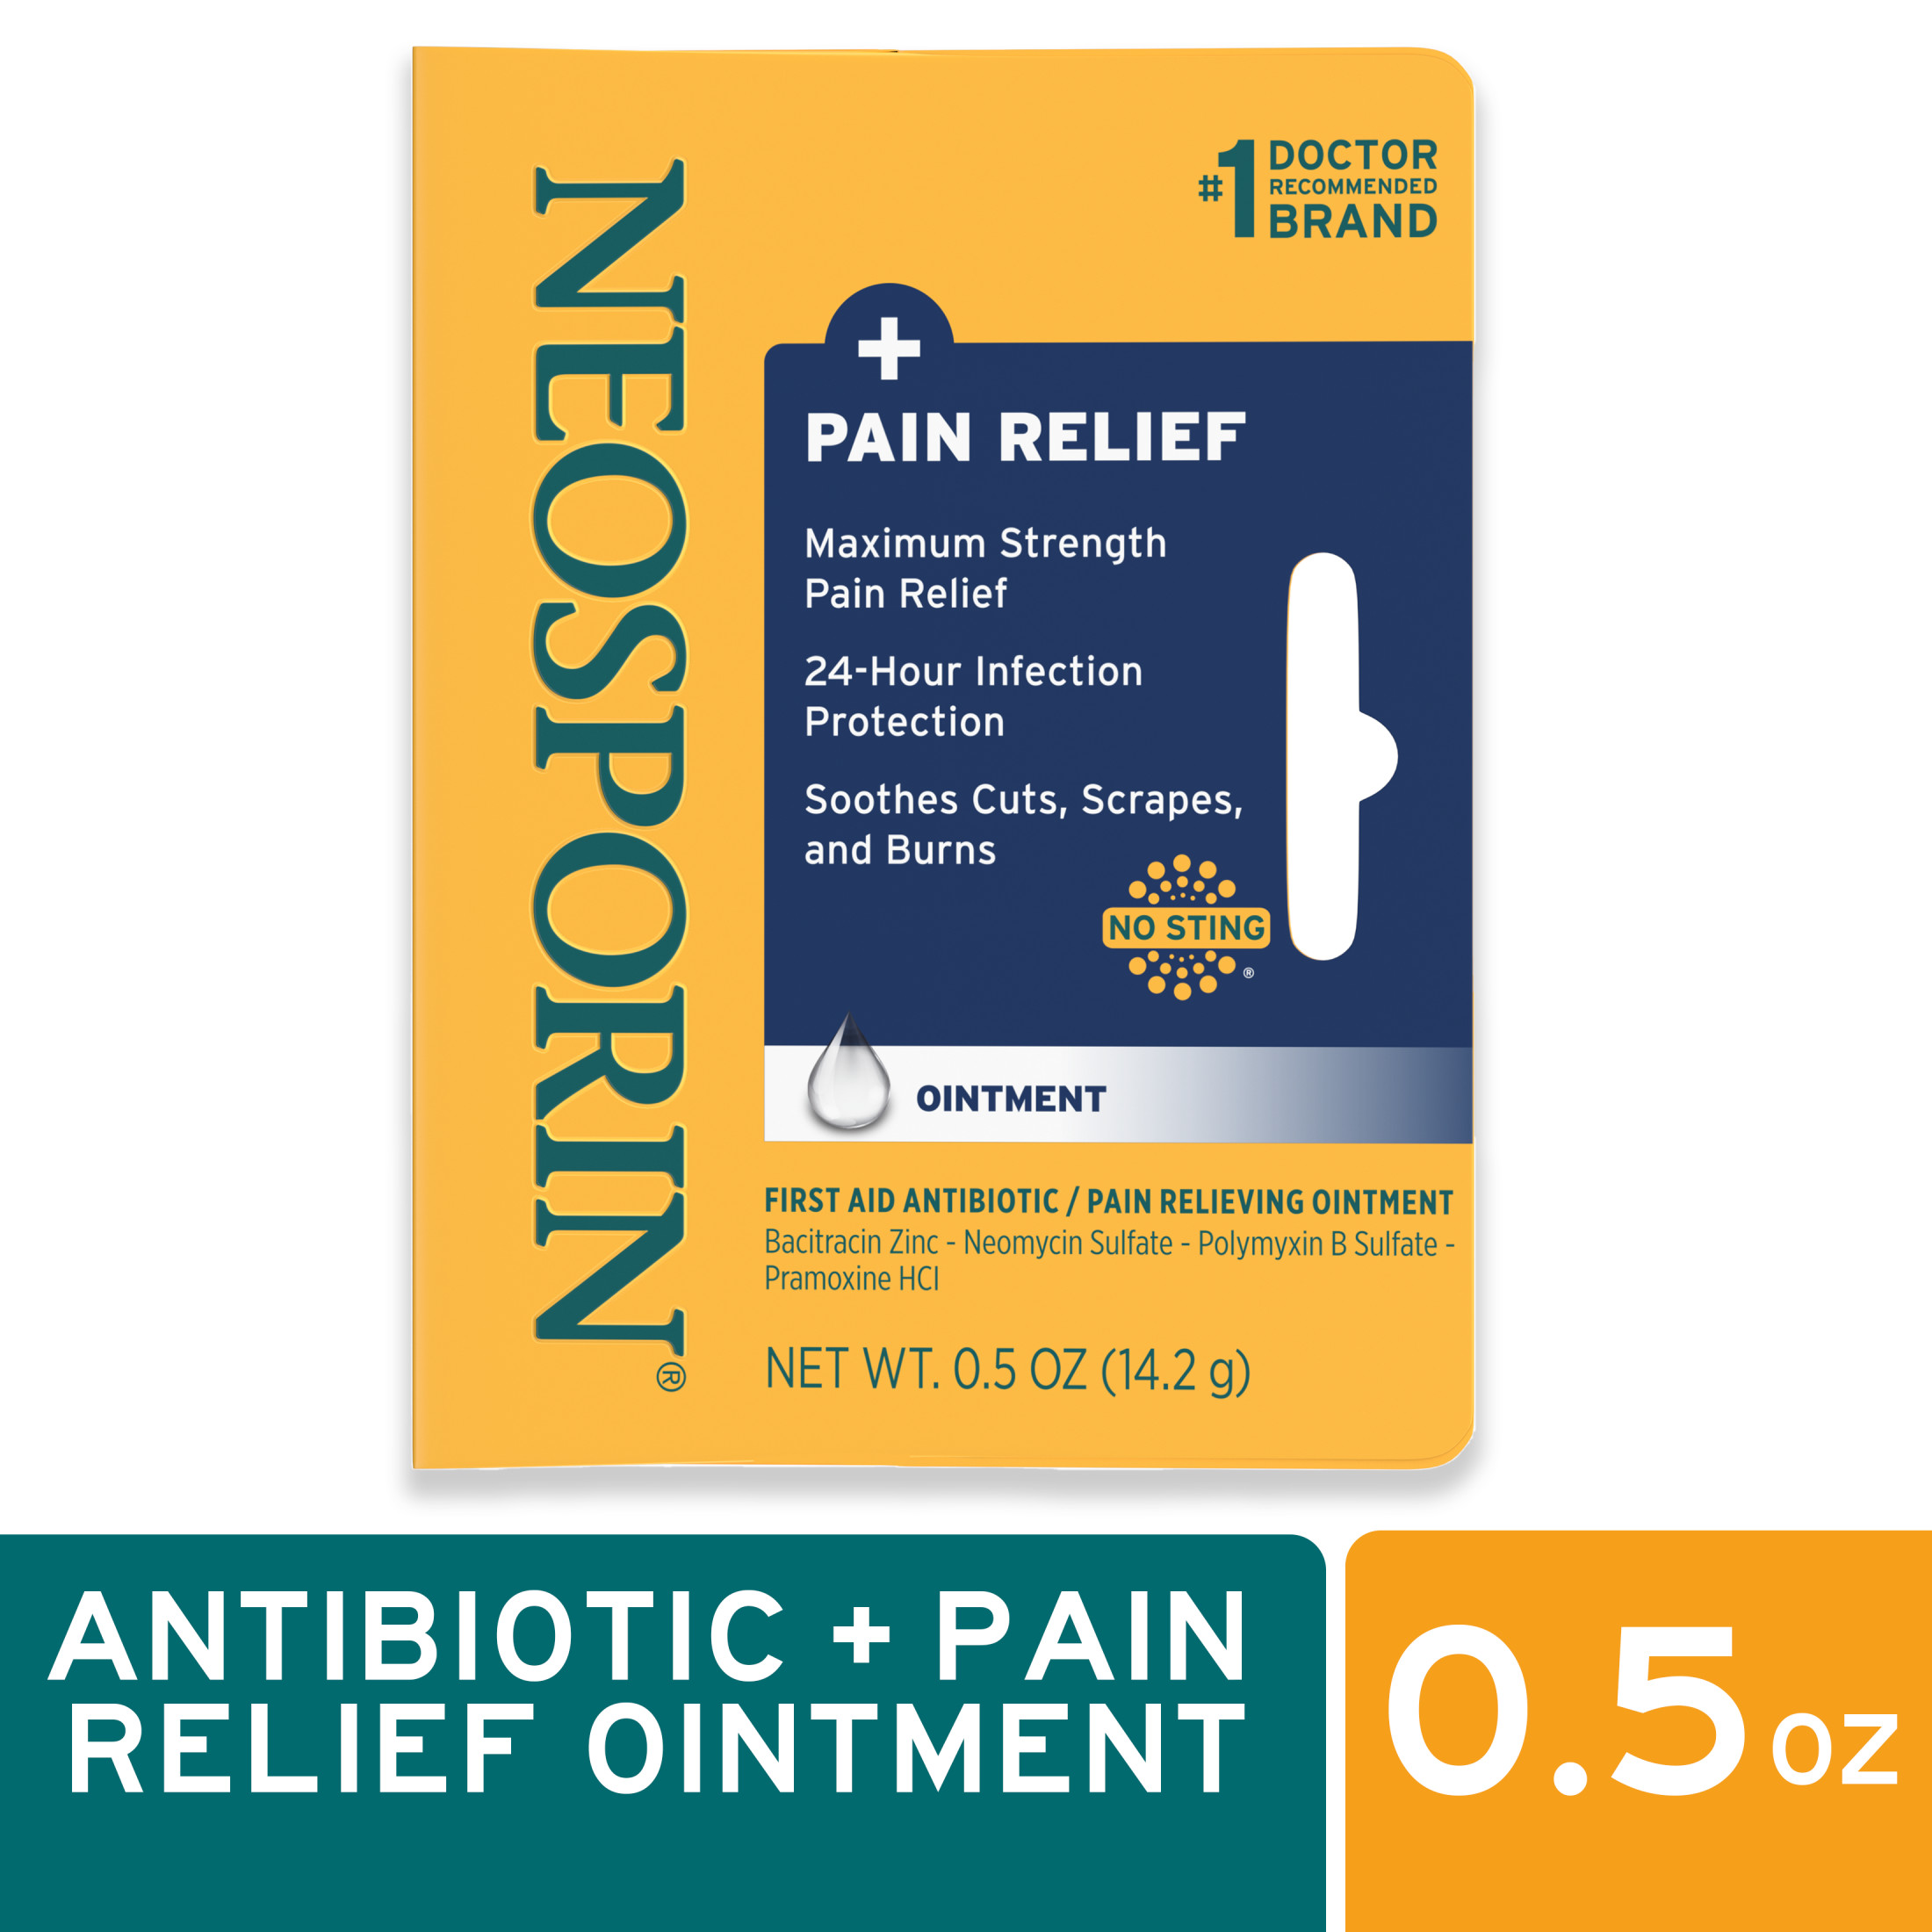 Neosporin + Pain Relief Dual Action Topical Antibiotic Ointment,.5 oz - image 1 of 11